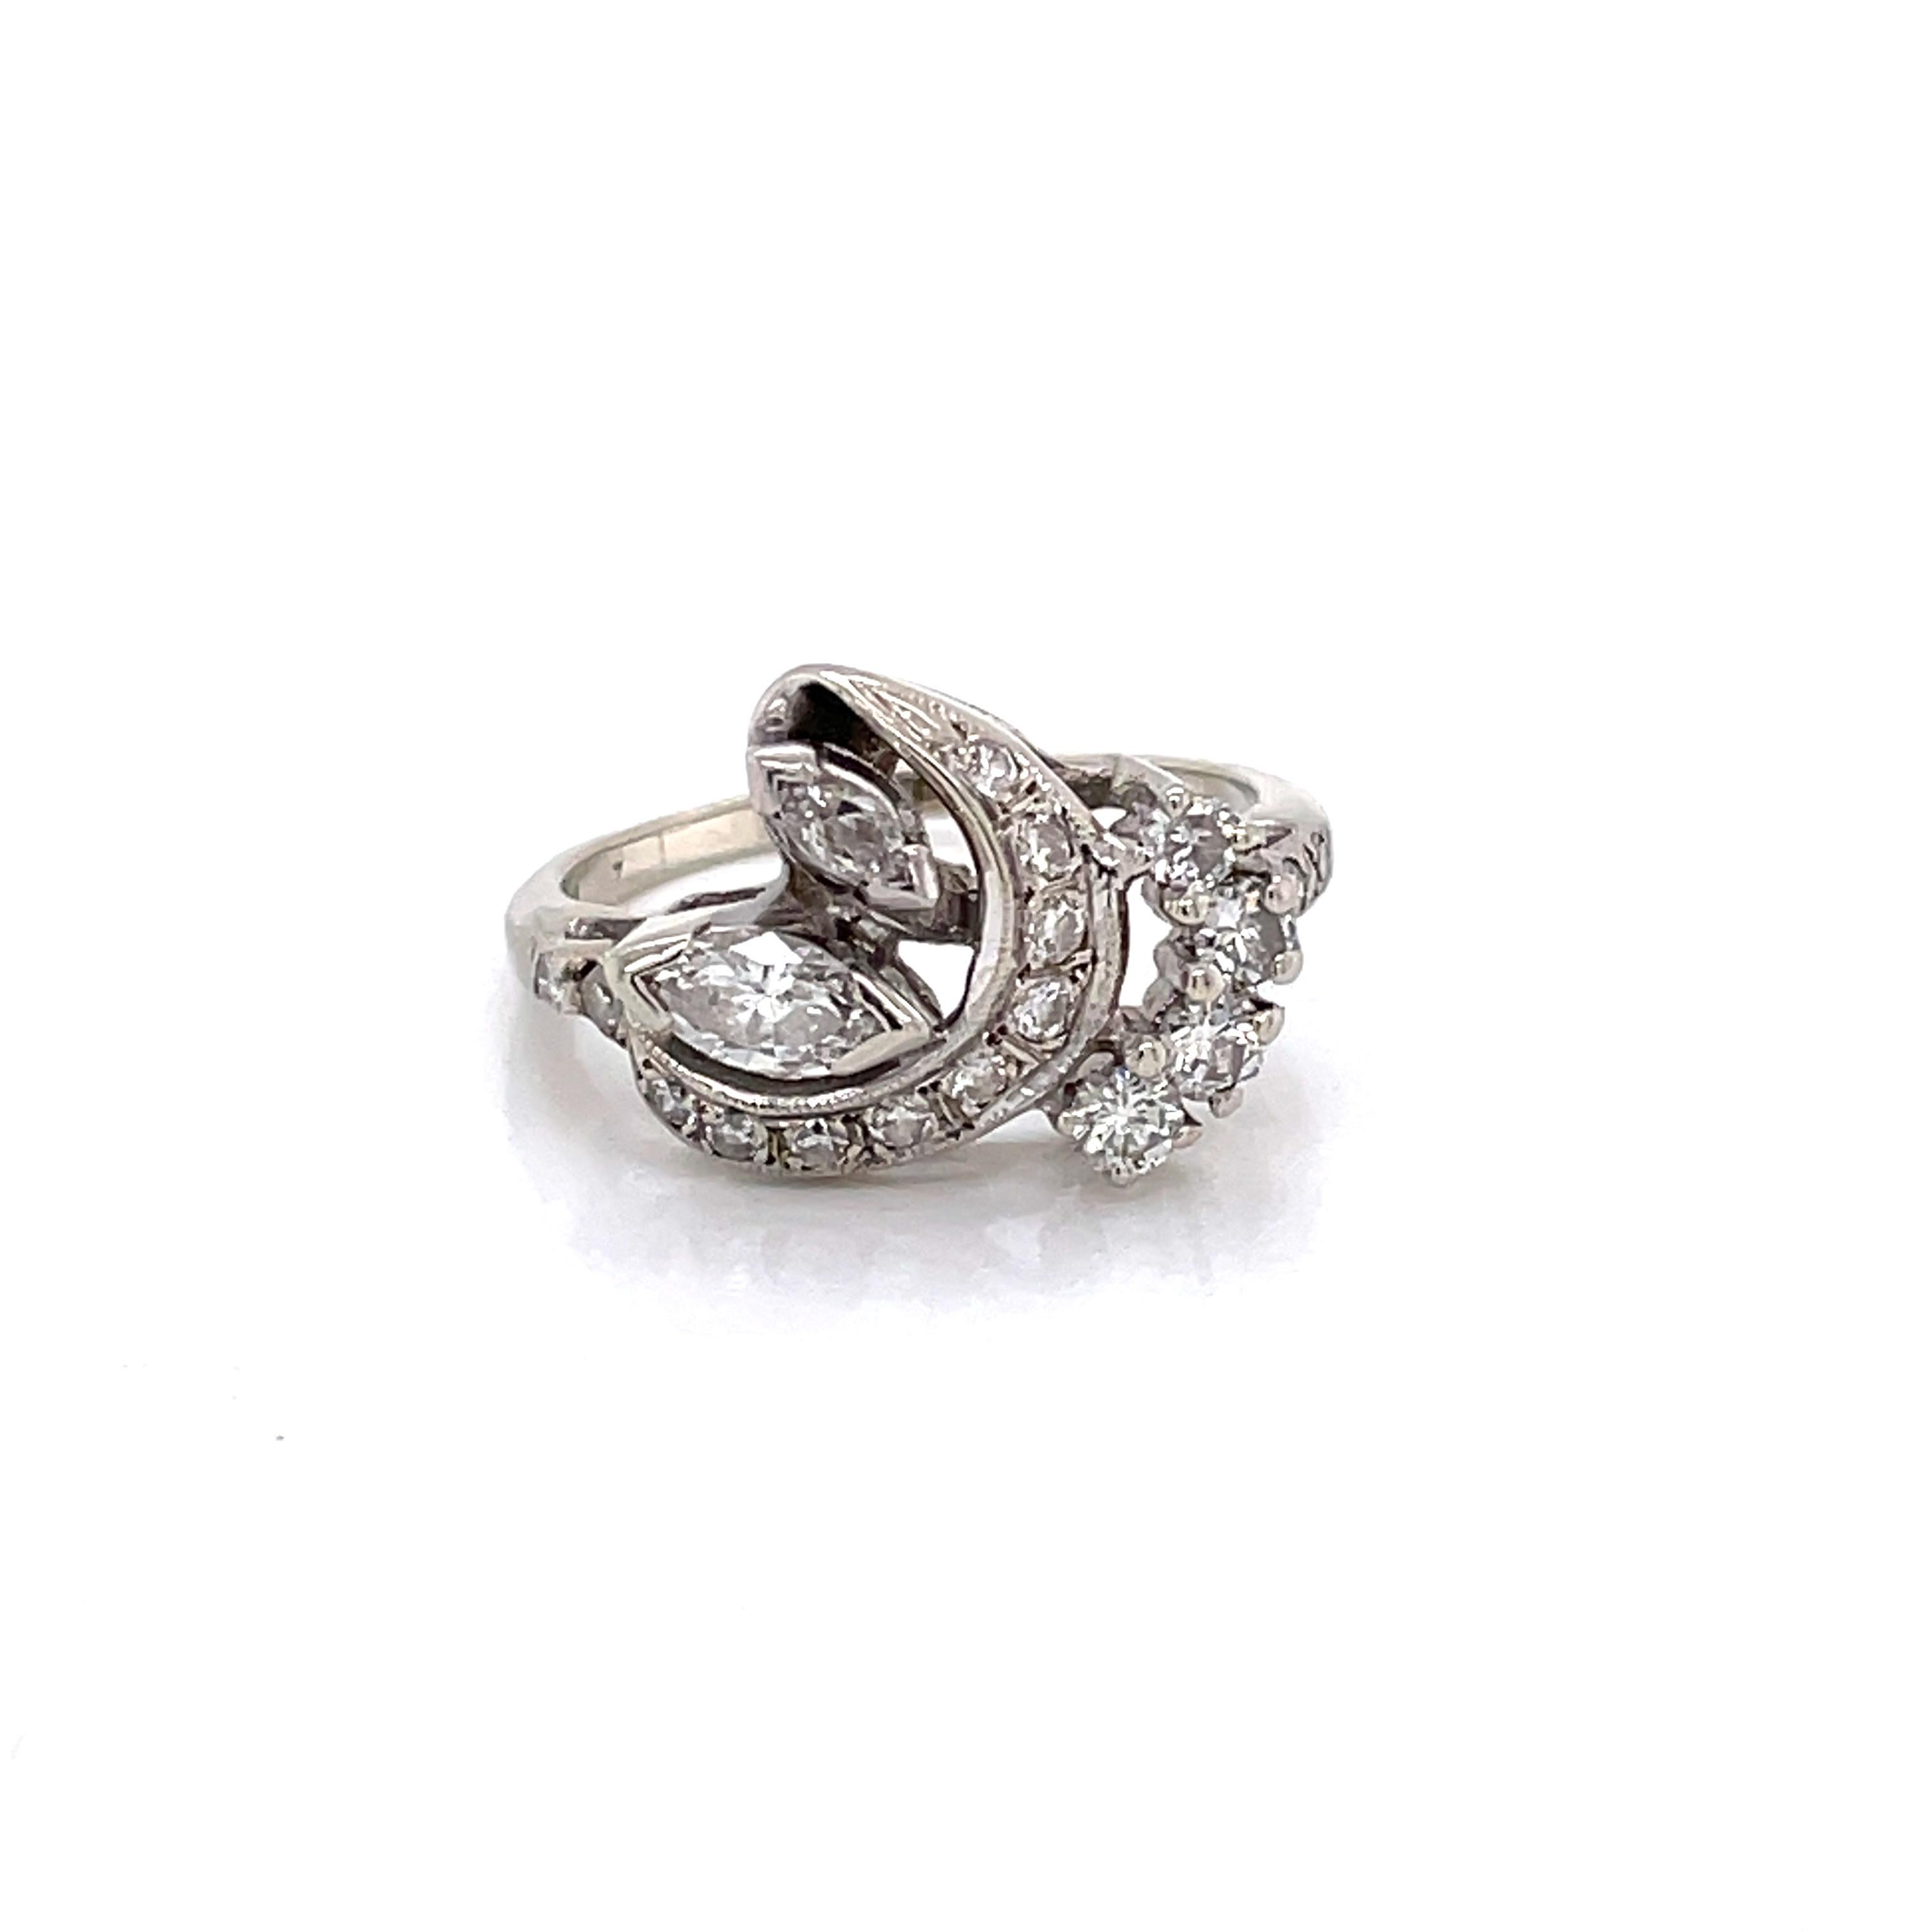 Antique Diamond Cluster 14 Karat White Gold Cocktail Ring In Good Condition For Sale In Mount Kisco, NY